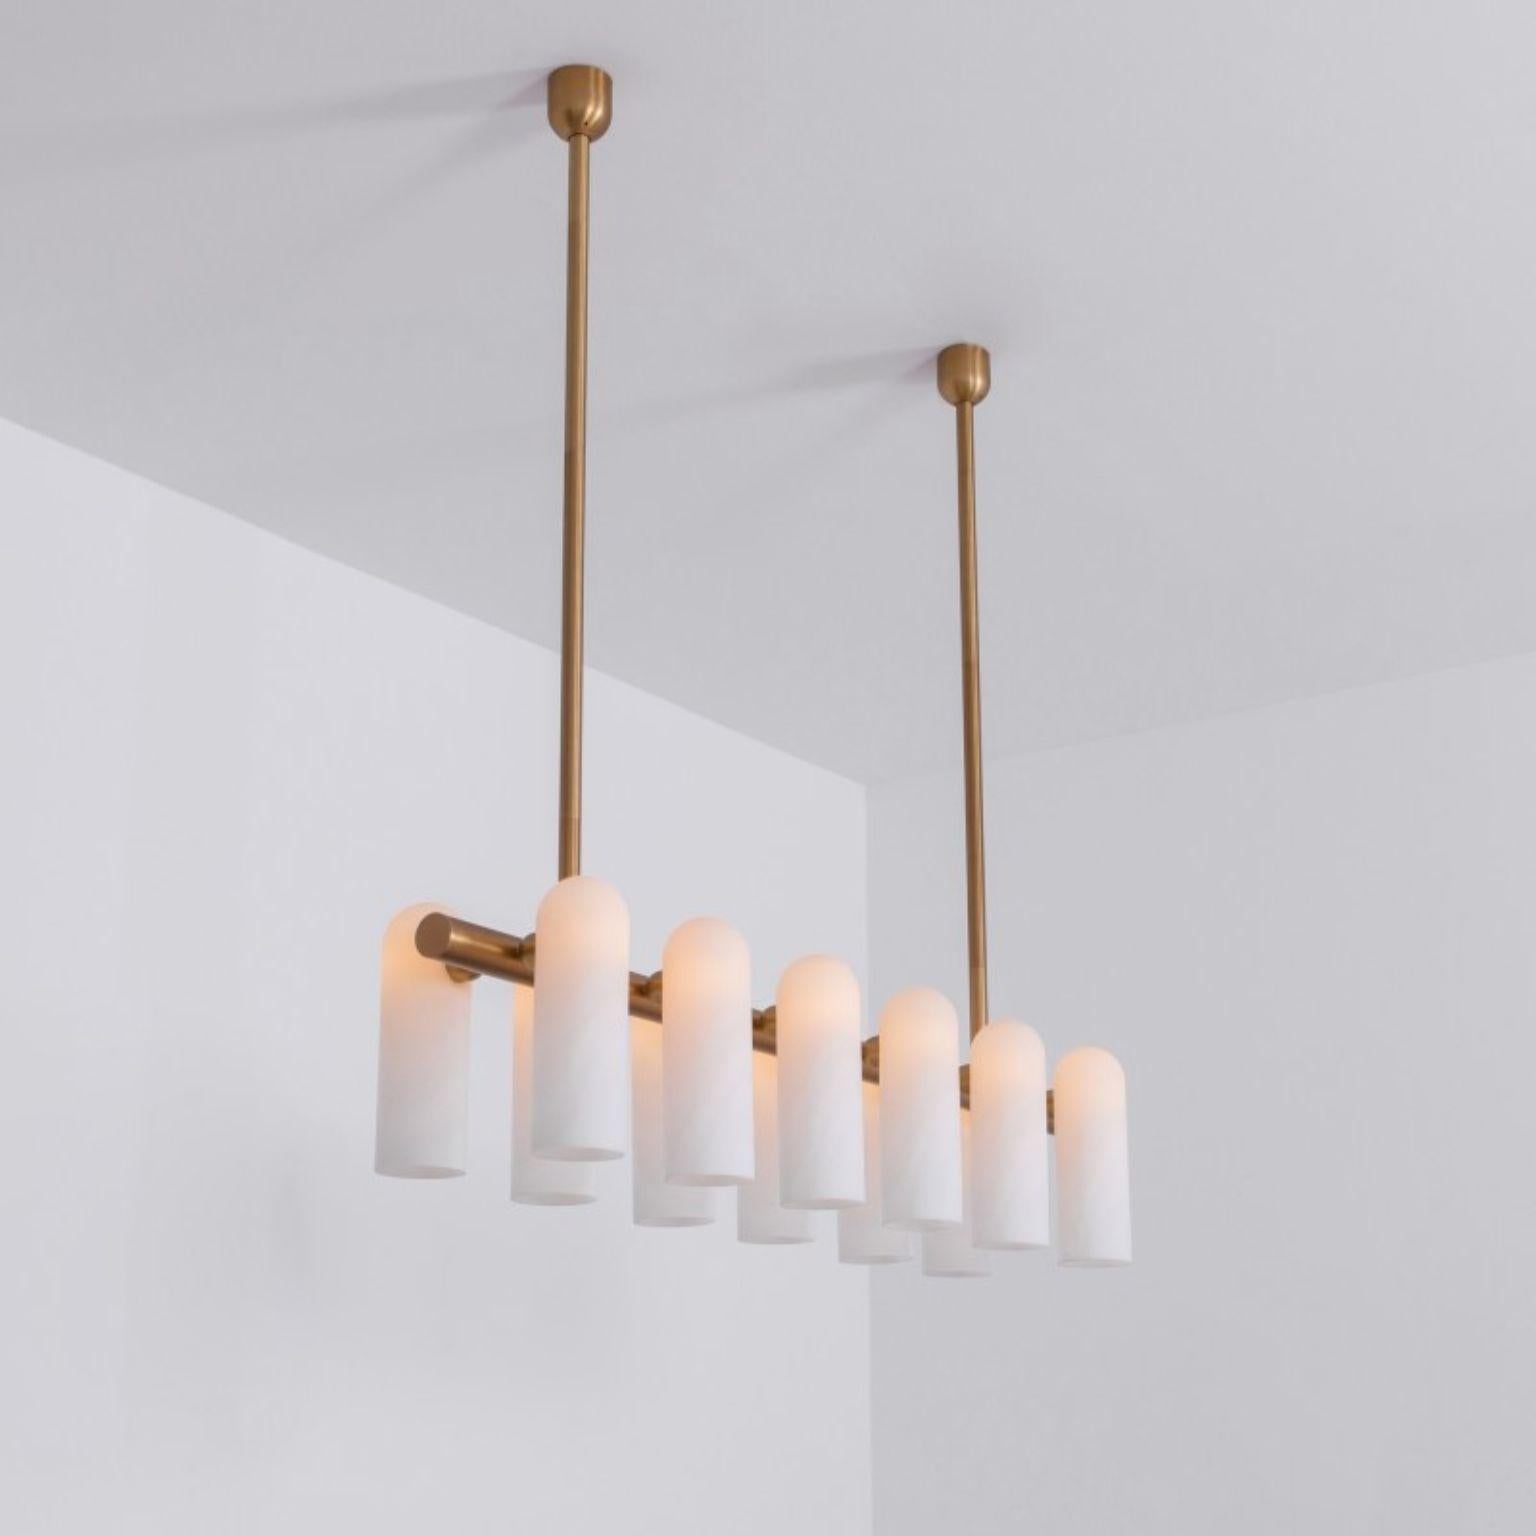 Odyssey Linear MD brass chandelier by Schwung
Dimensions: W 137 x D 31 x H 132 cm
Materials: Solid brass, frosted glass

Finishes available: Black gunmetal, polished nickel
  

 Schwung is a german word, and loosely defined, means energy or